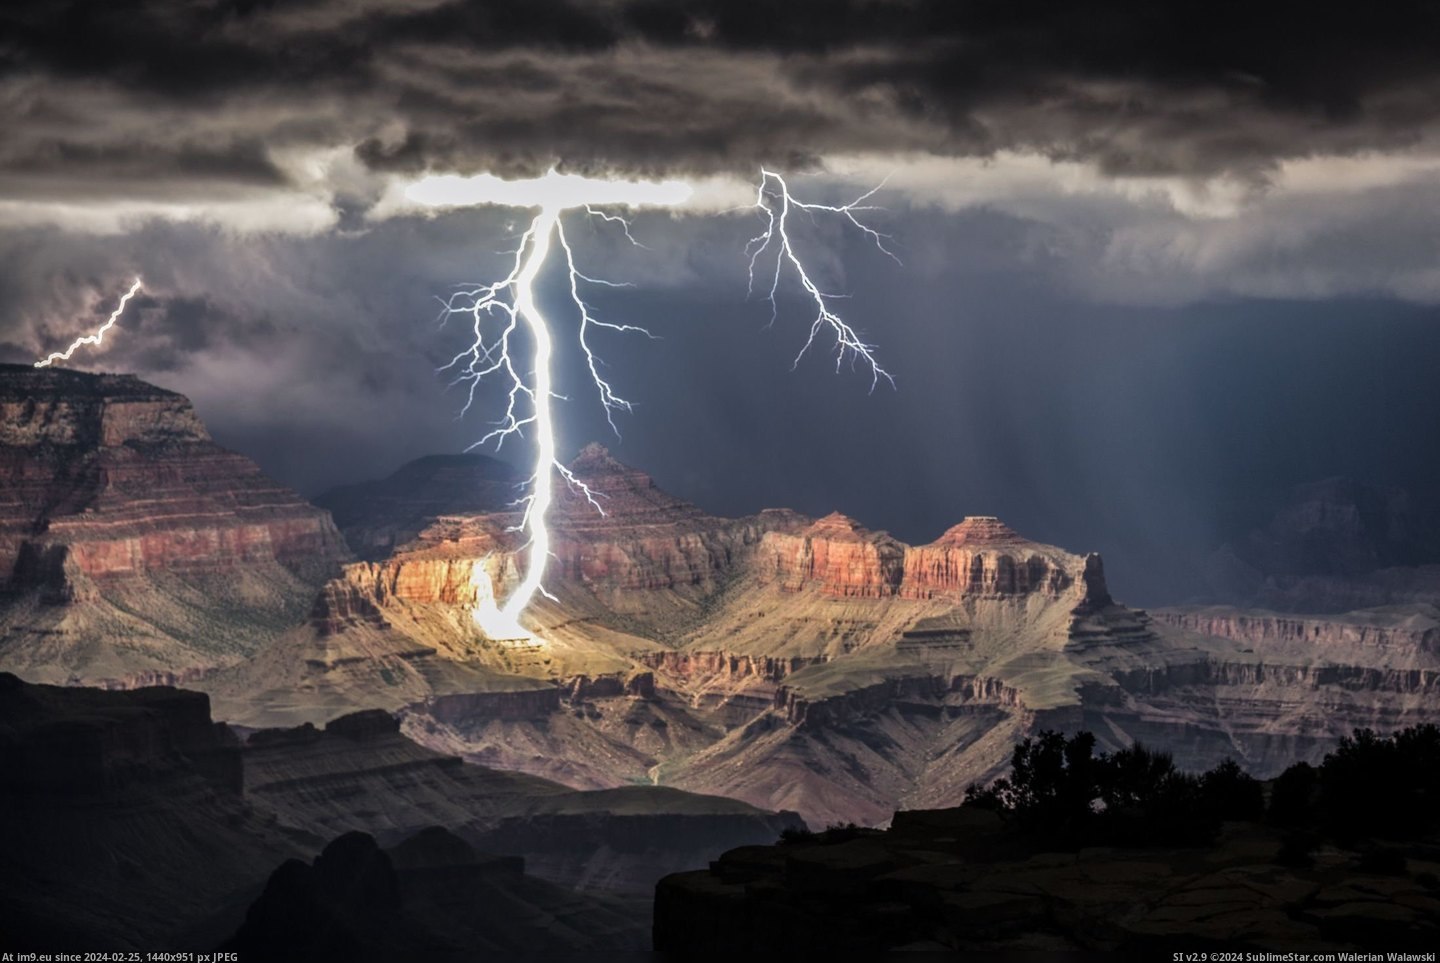 #Canyon #Lightning #Lit #Grand [Pics] The Grand Canyon lit only by lightning Pic. (Image of album My r/PICS favs))